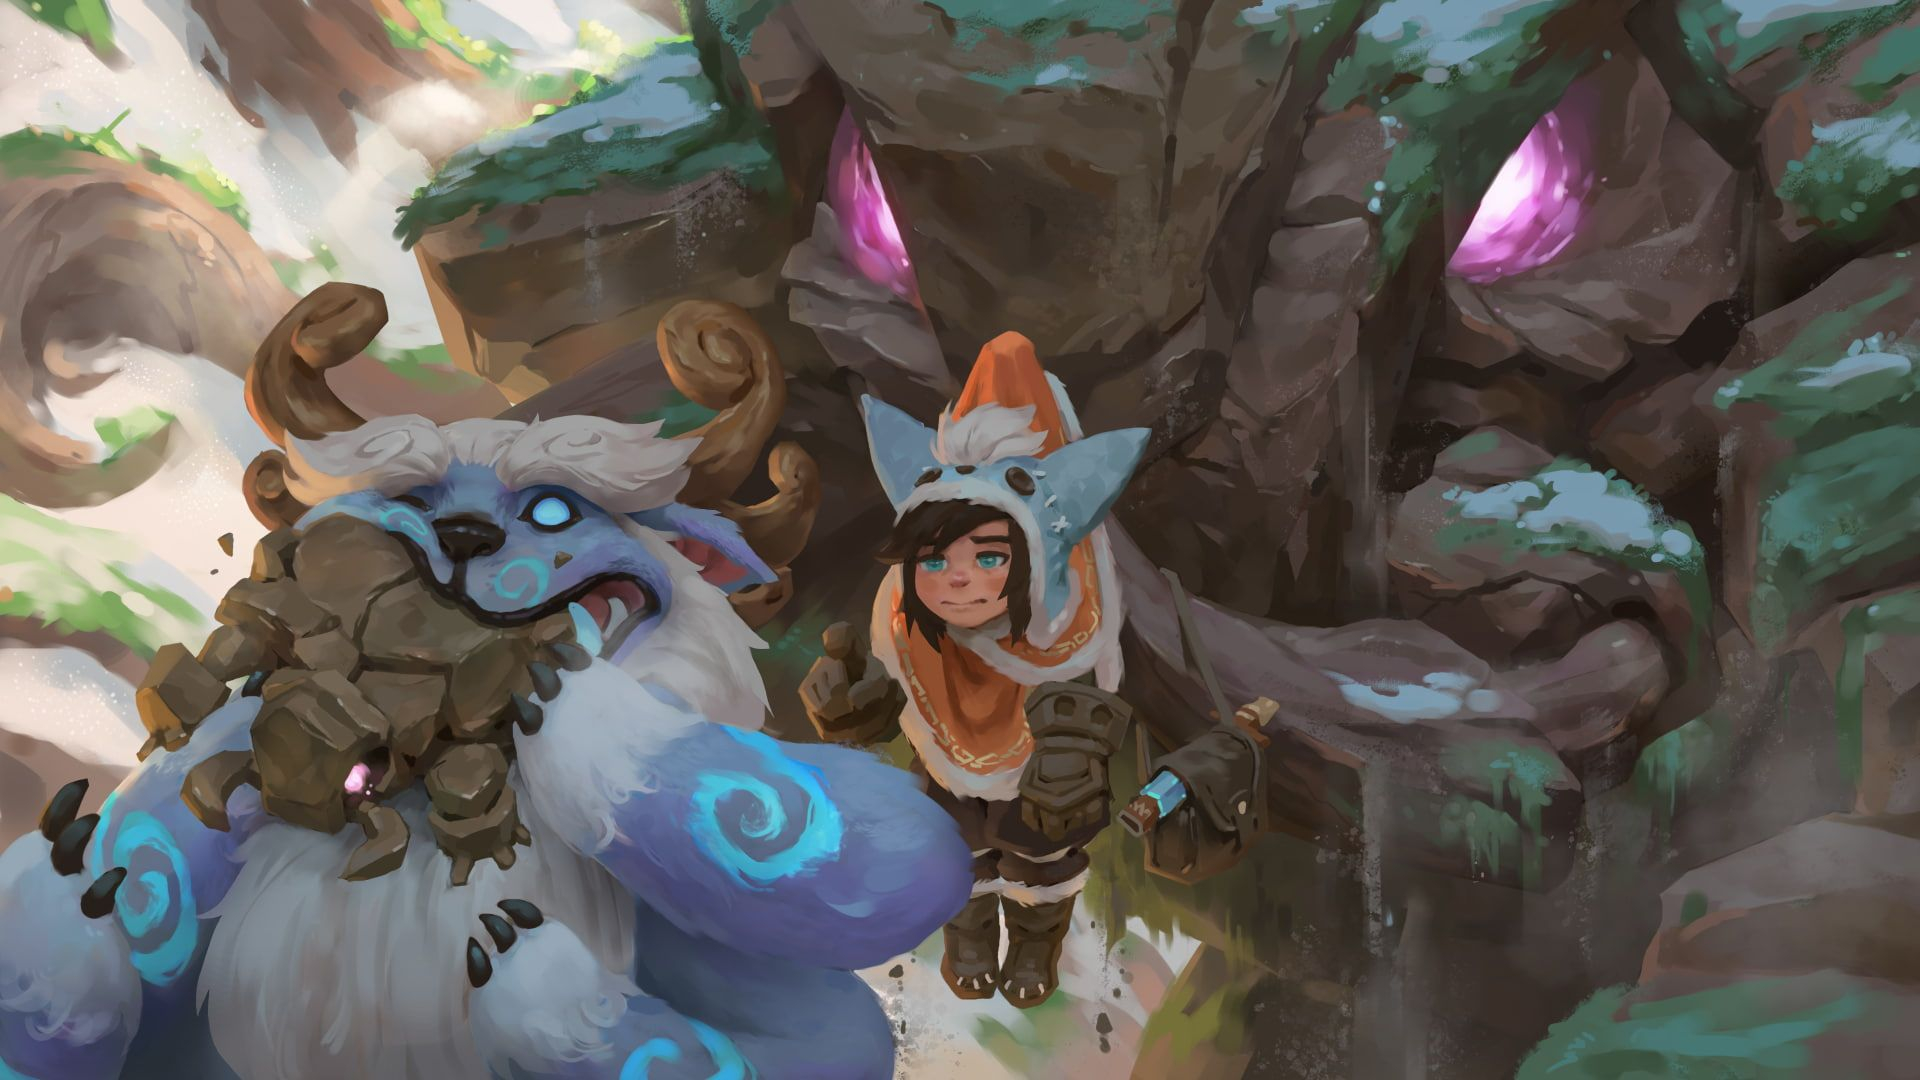 1920x1080 Video Game League Of Legends Krug (League Of Legends) Nunu (League Of Legends) Willump (Le&acirc;&#128;&brvbar; | League of legends, Lol league of legends, League of legends characters